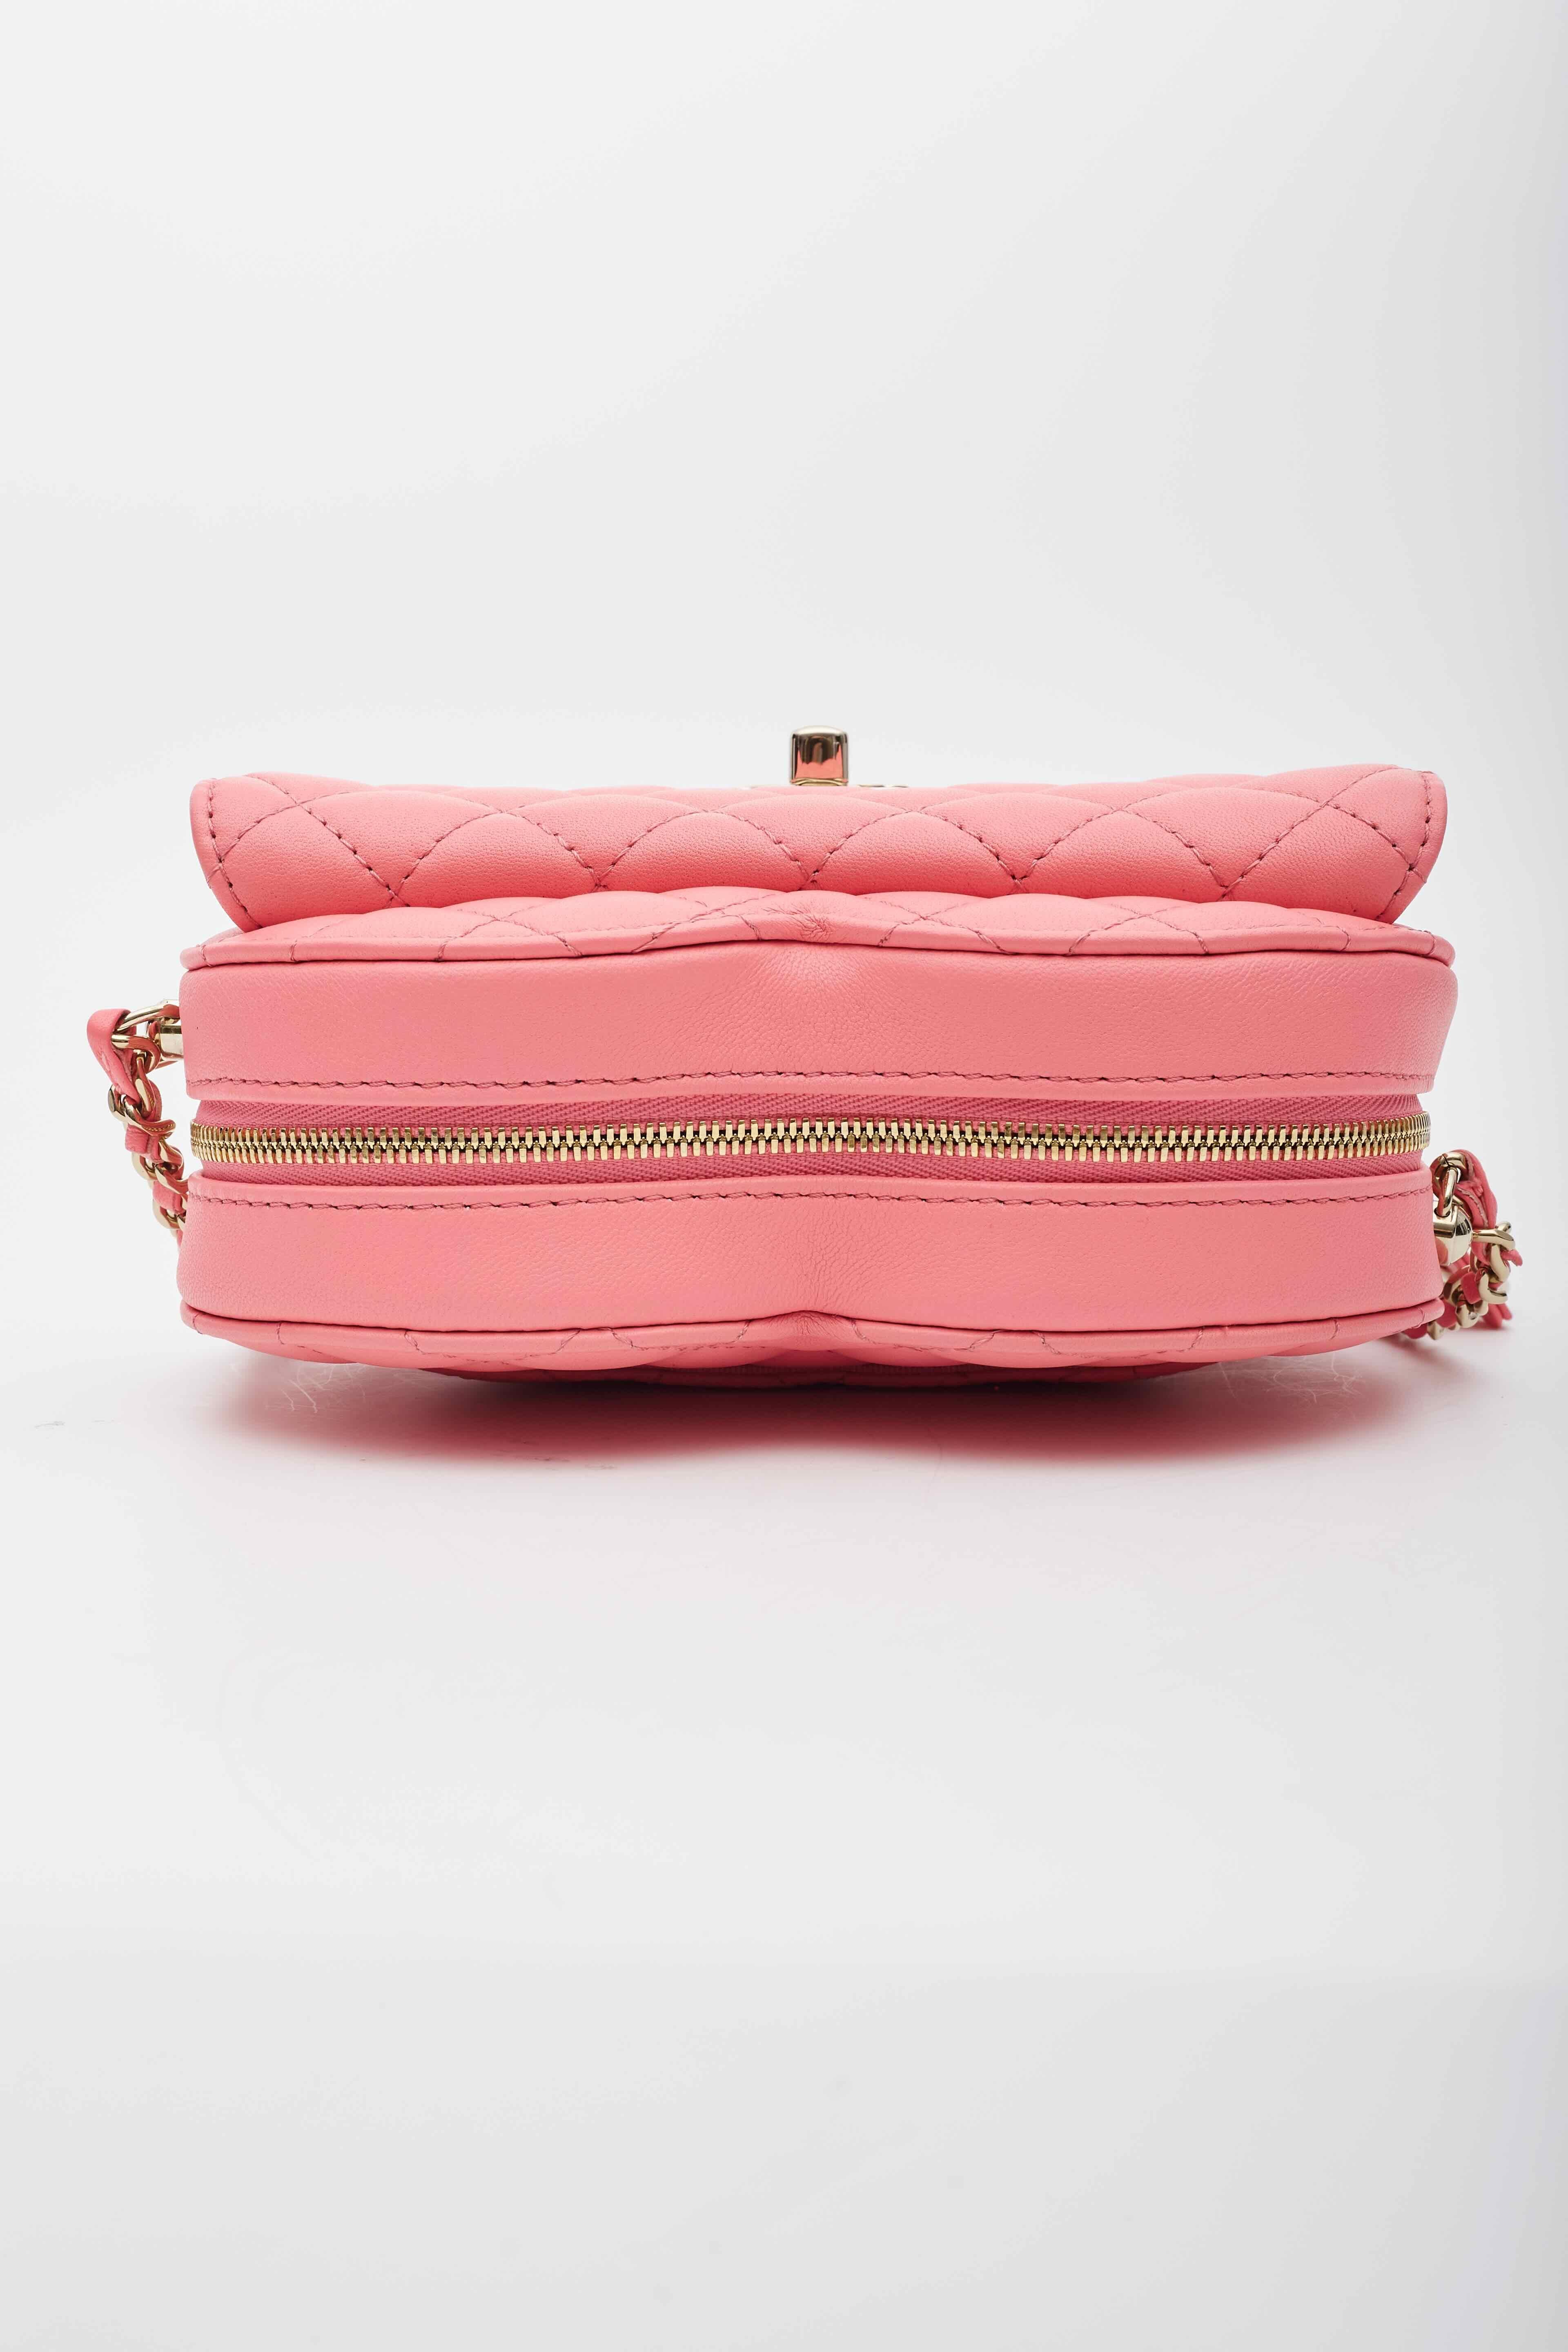 Chanel Lambskin Quilted CC In Love Heart Shoulder Bag Pink 5